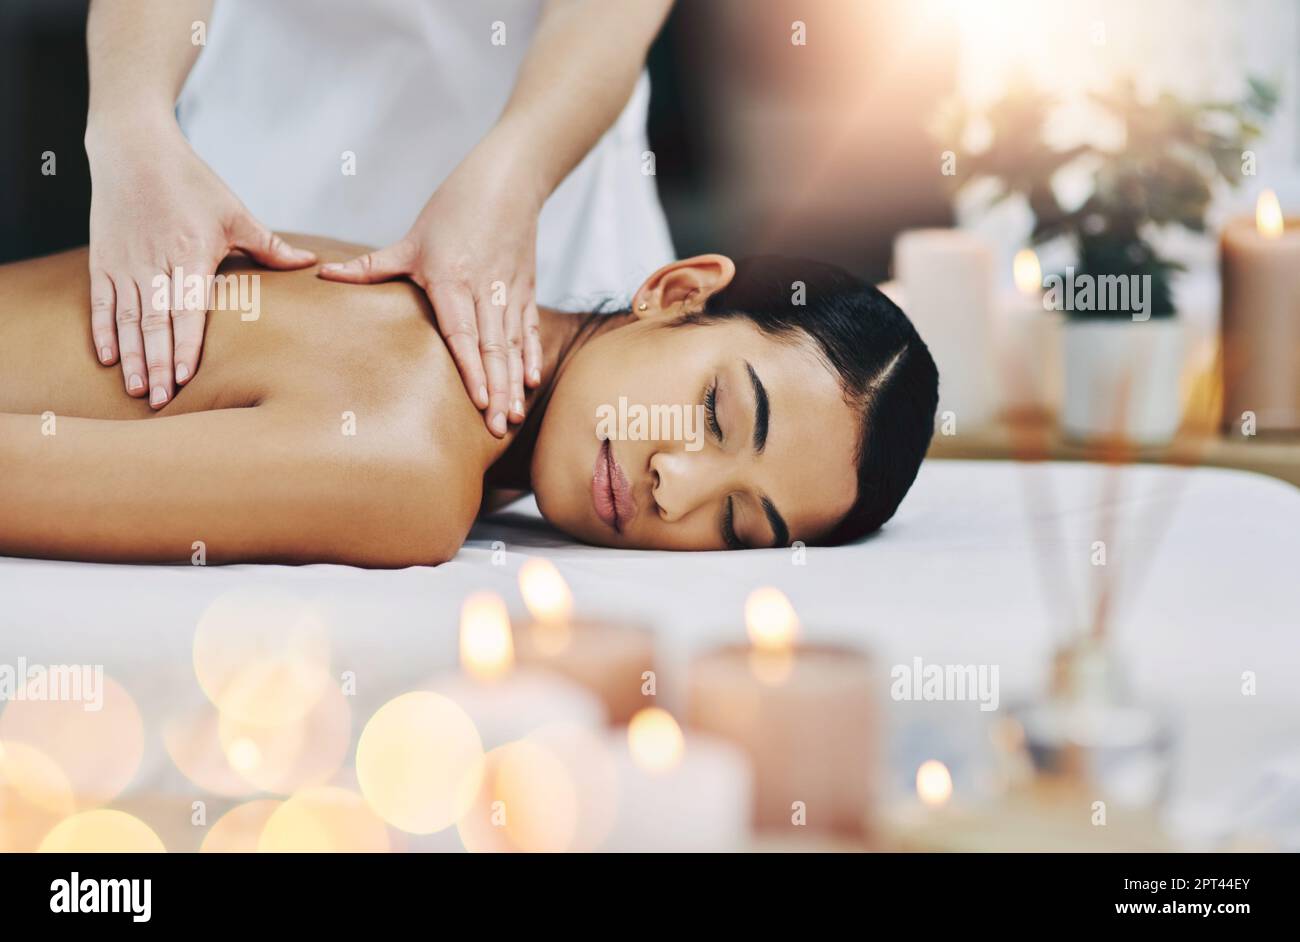 Getting rid of all the tension. a relaxed an cheerful young woman getting a massage indoors at a spa Stock Photo